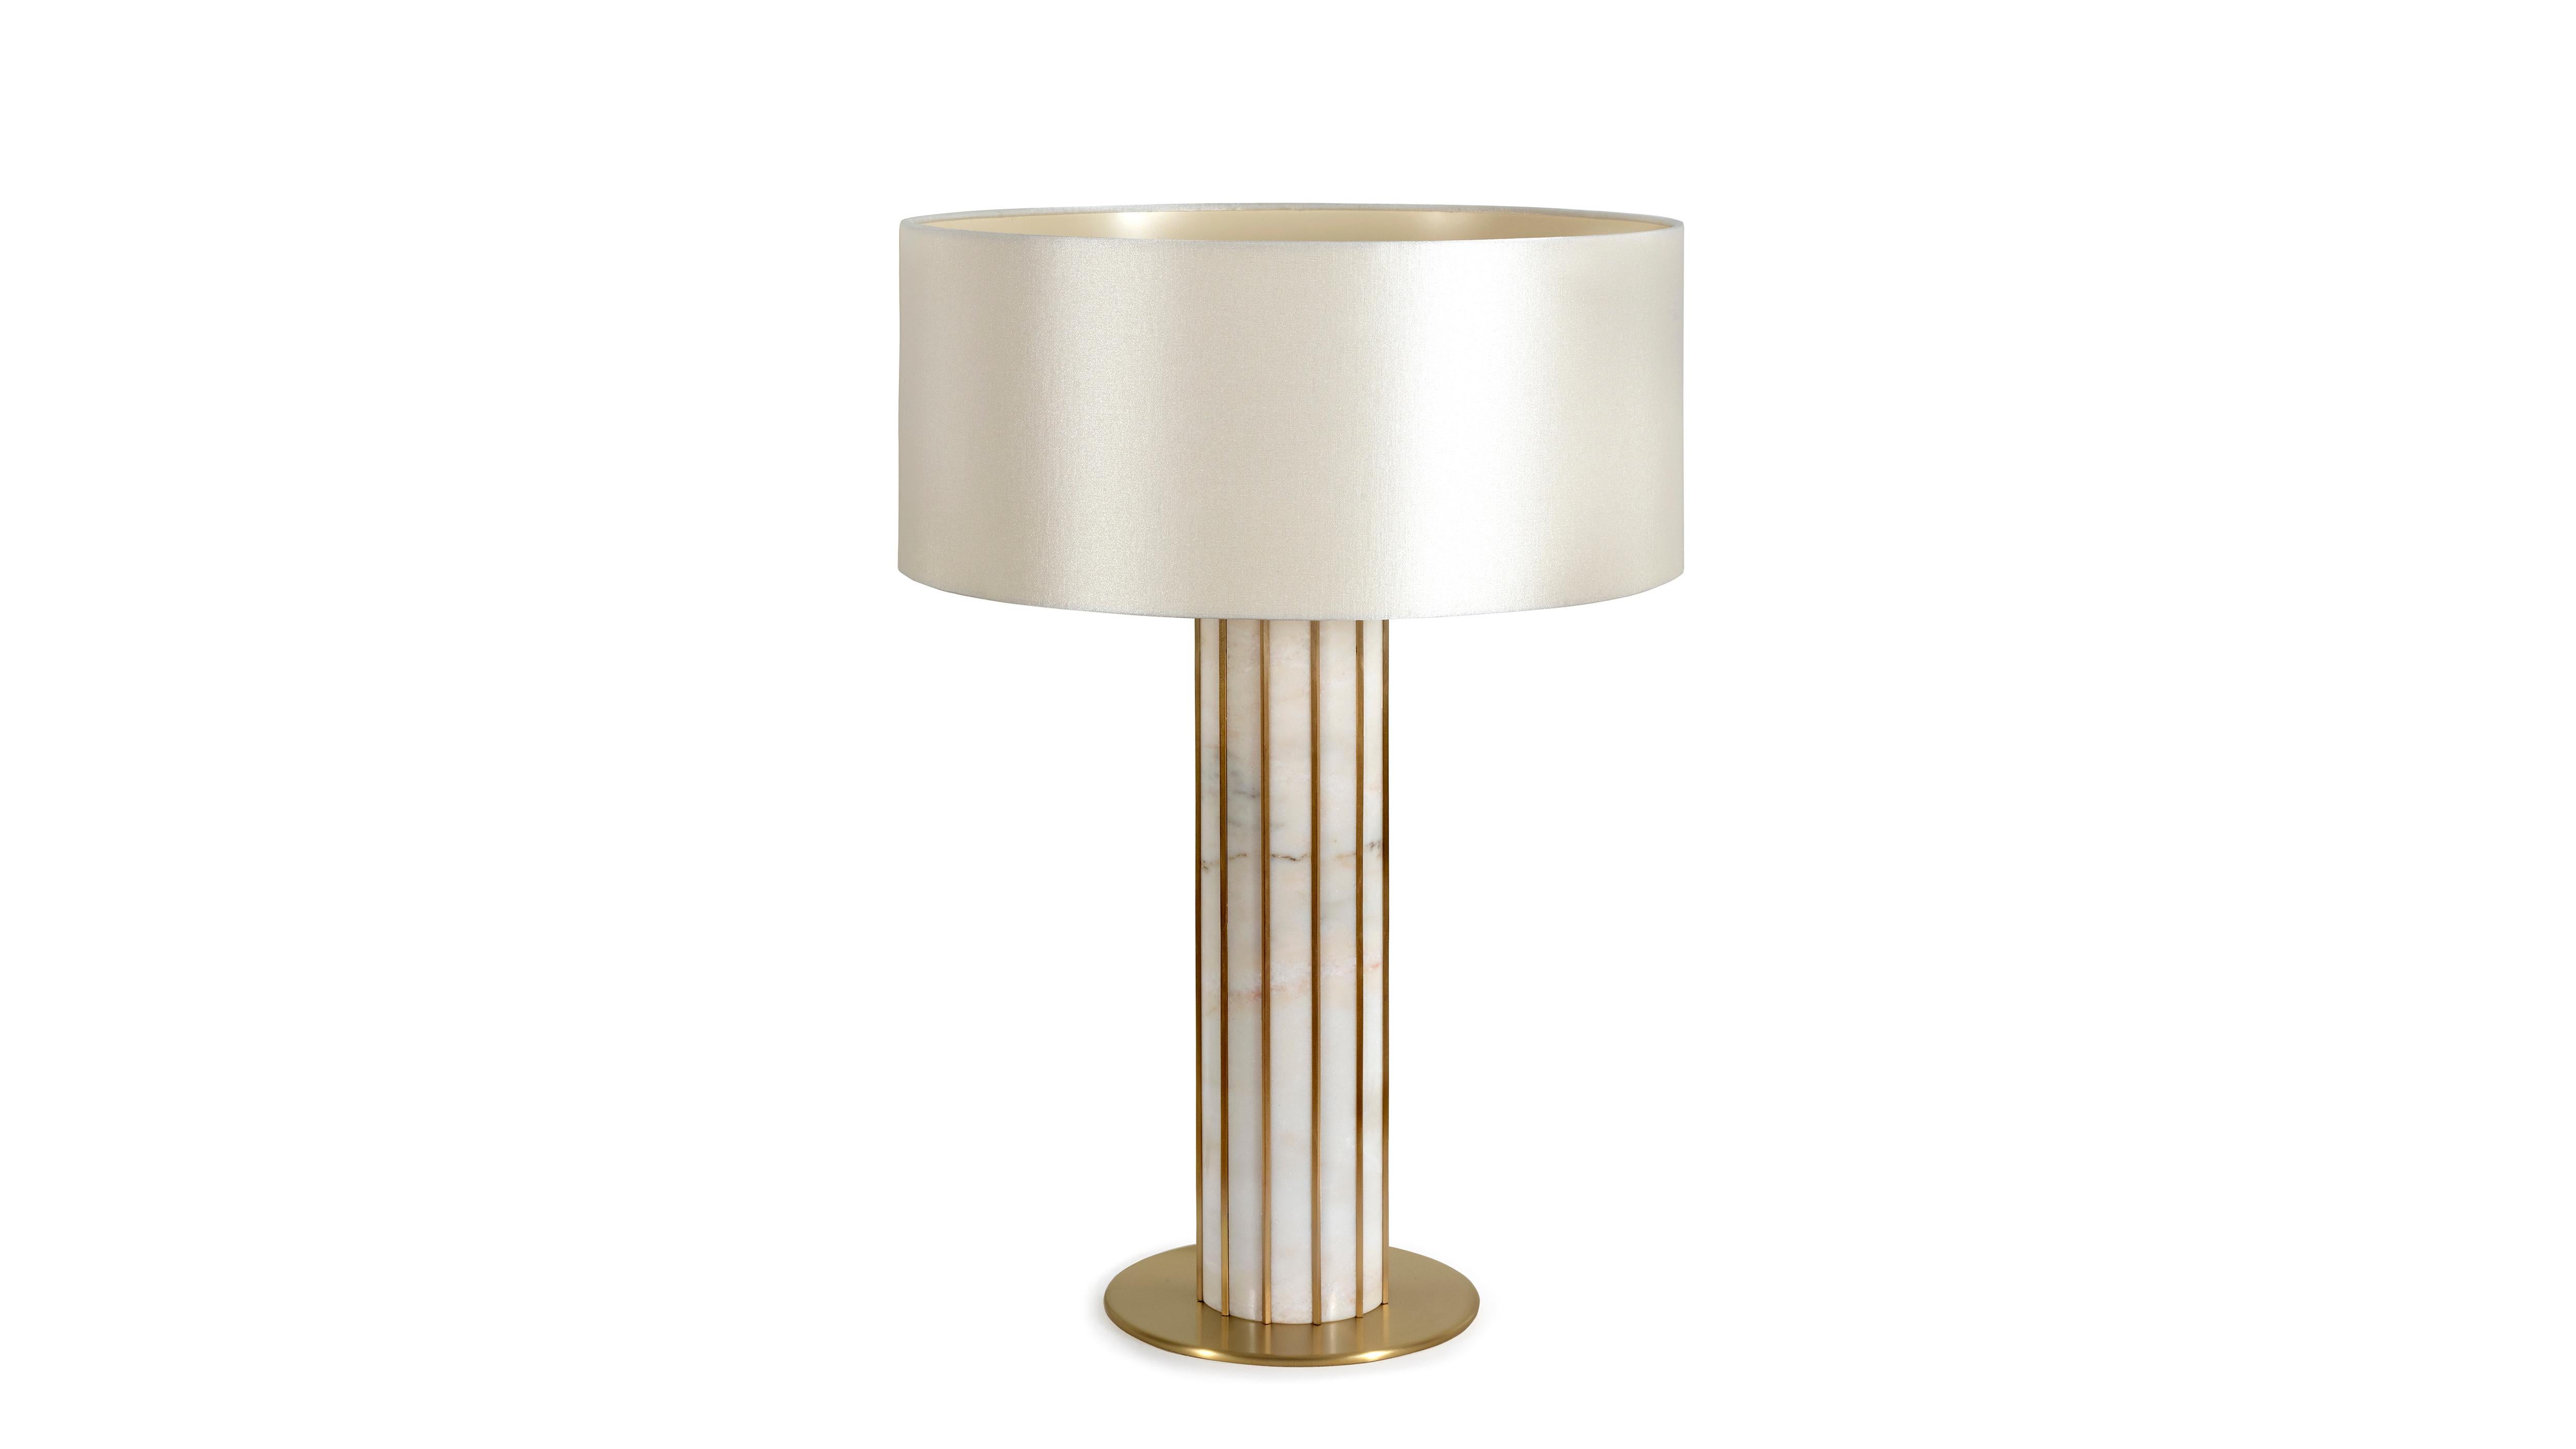 Seagram Estremoz Marble Table Lamp by InsidherLand
Dimensions: D 45 x W 45 x H 65 cm.
Materials: Satin, Estremoz marble, brushed brass.
13 kg.
Available in other marbles and metals.

The Seagram table lamp receives the name of the first attempt at